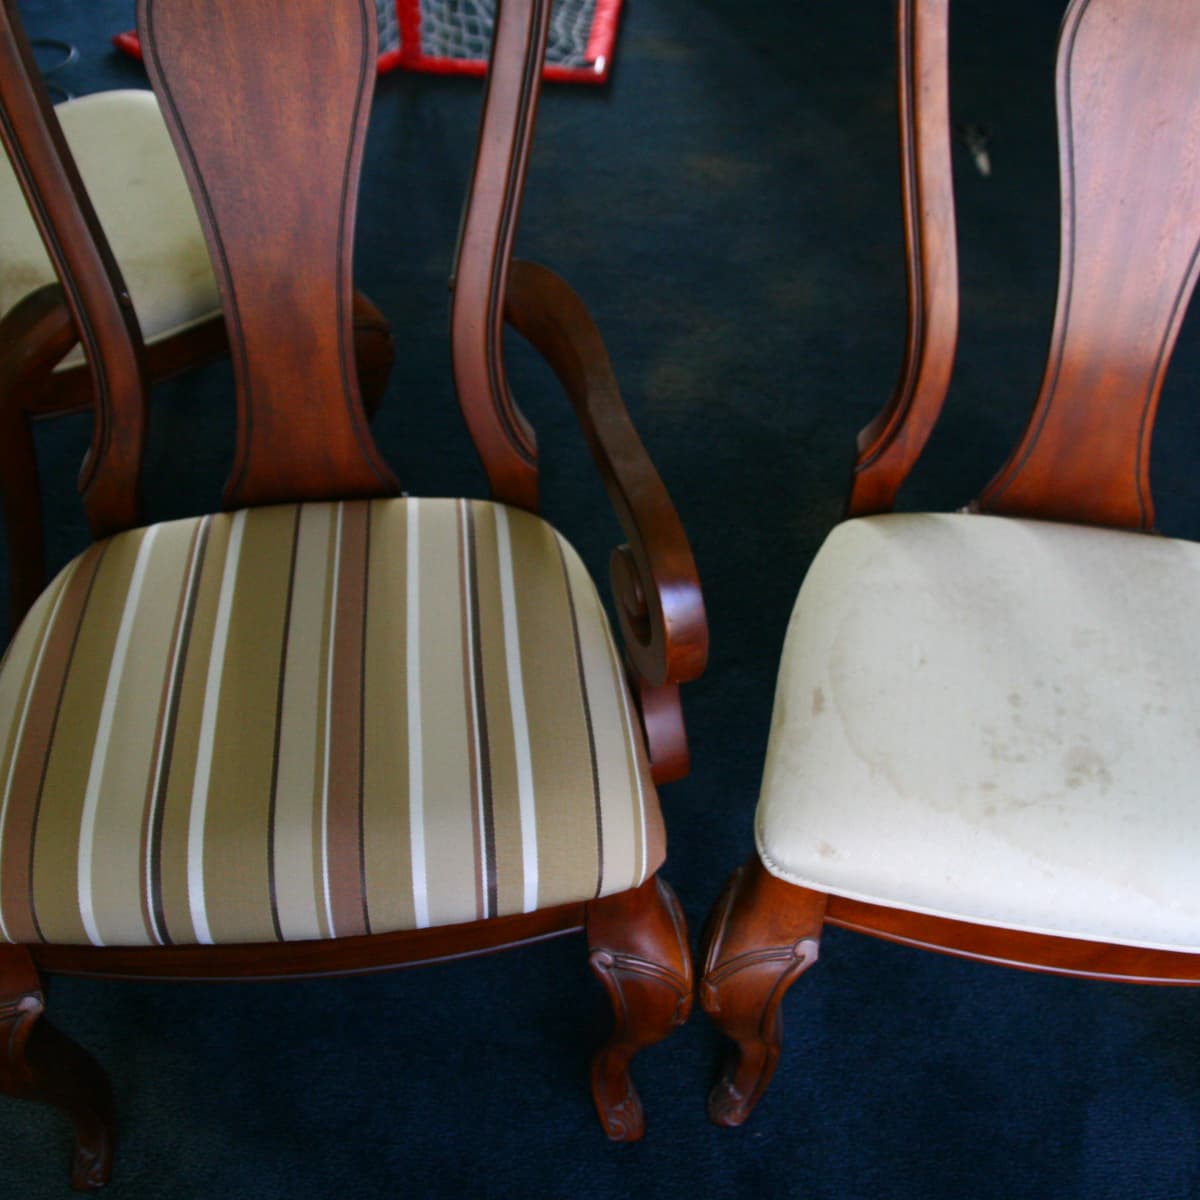 How To Reupholster A Dining Room Chair, Upholstering Dining Chairs Uk